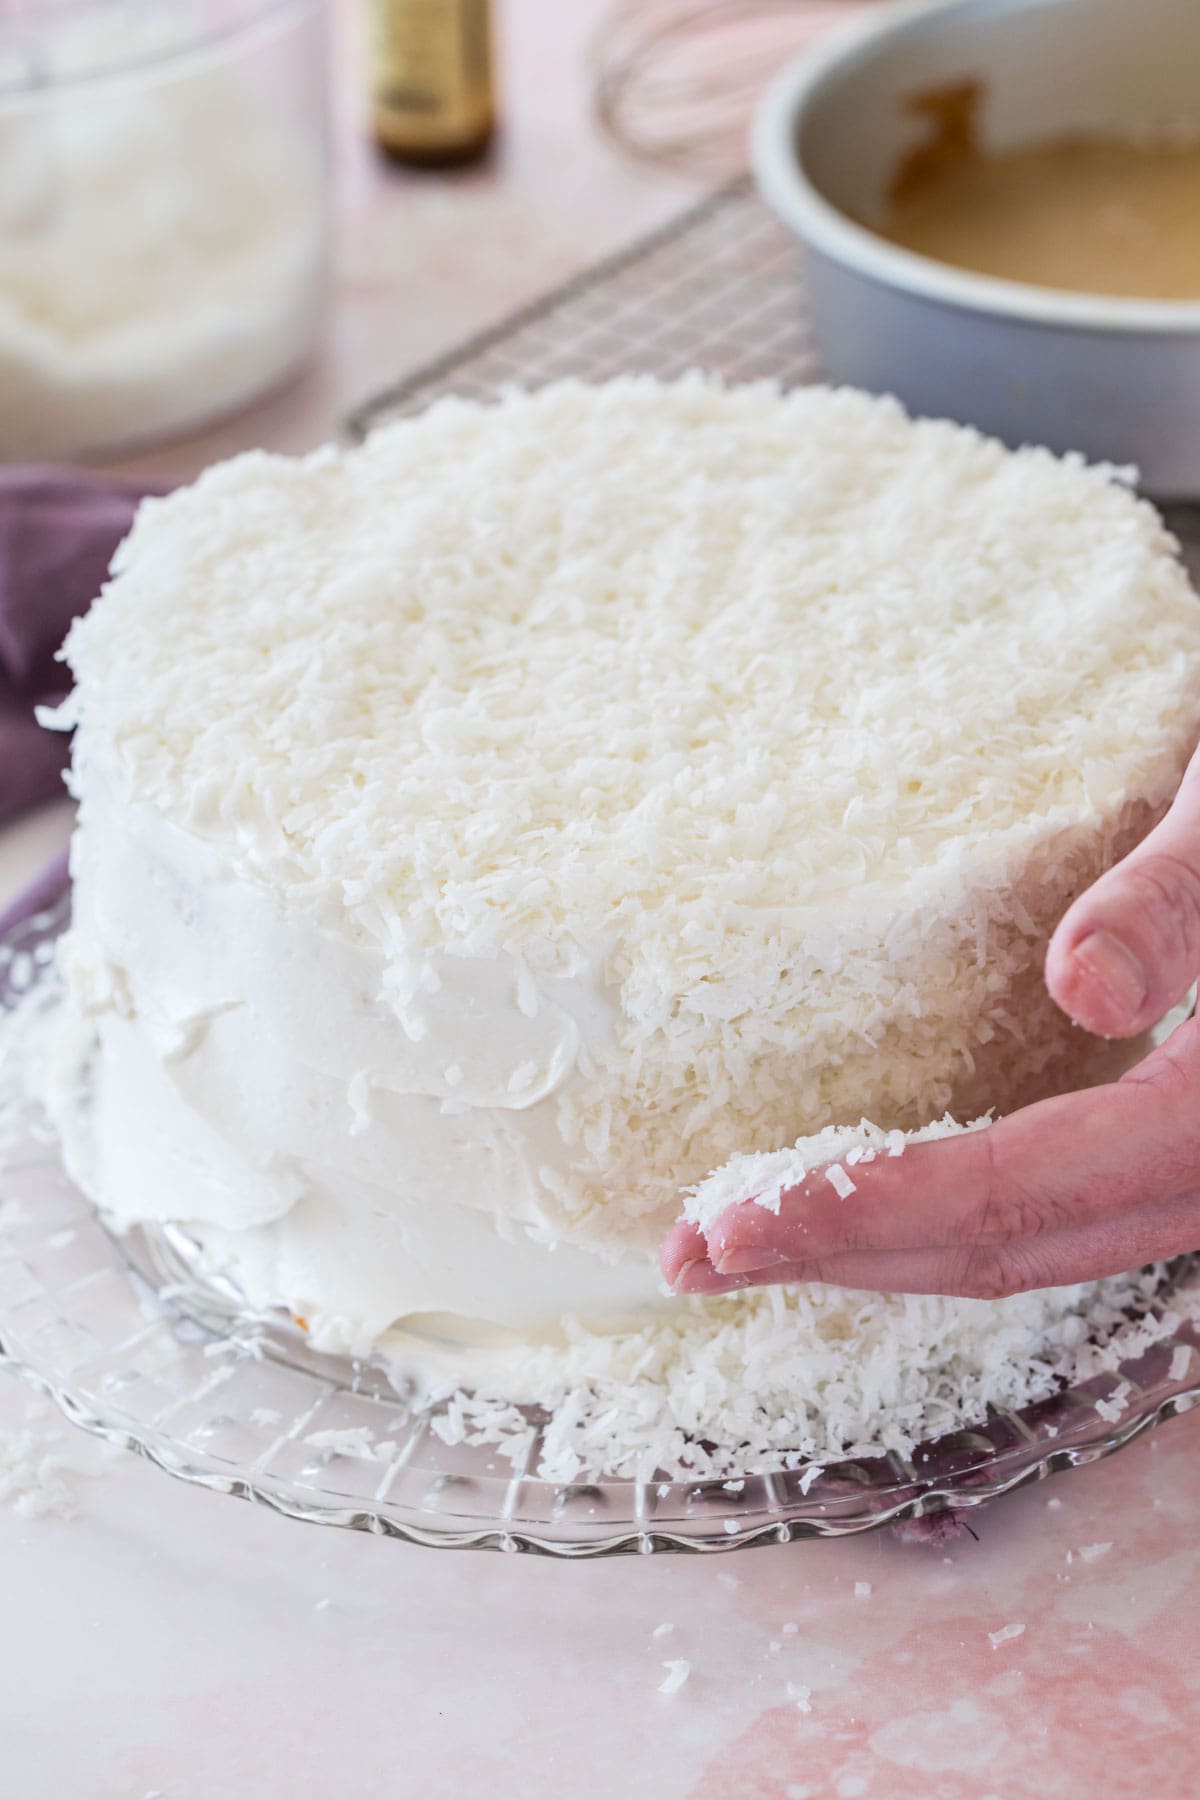 Covering a white-iced cake with shredded coconut